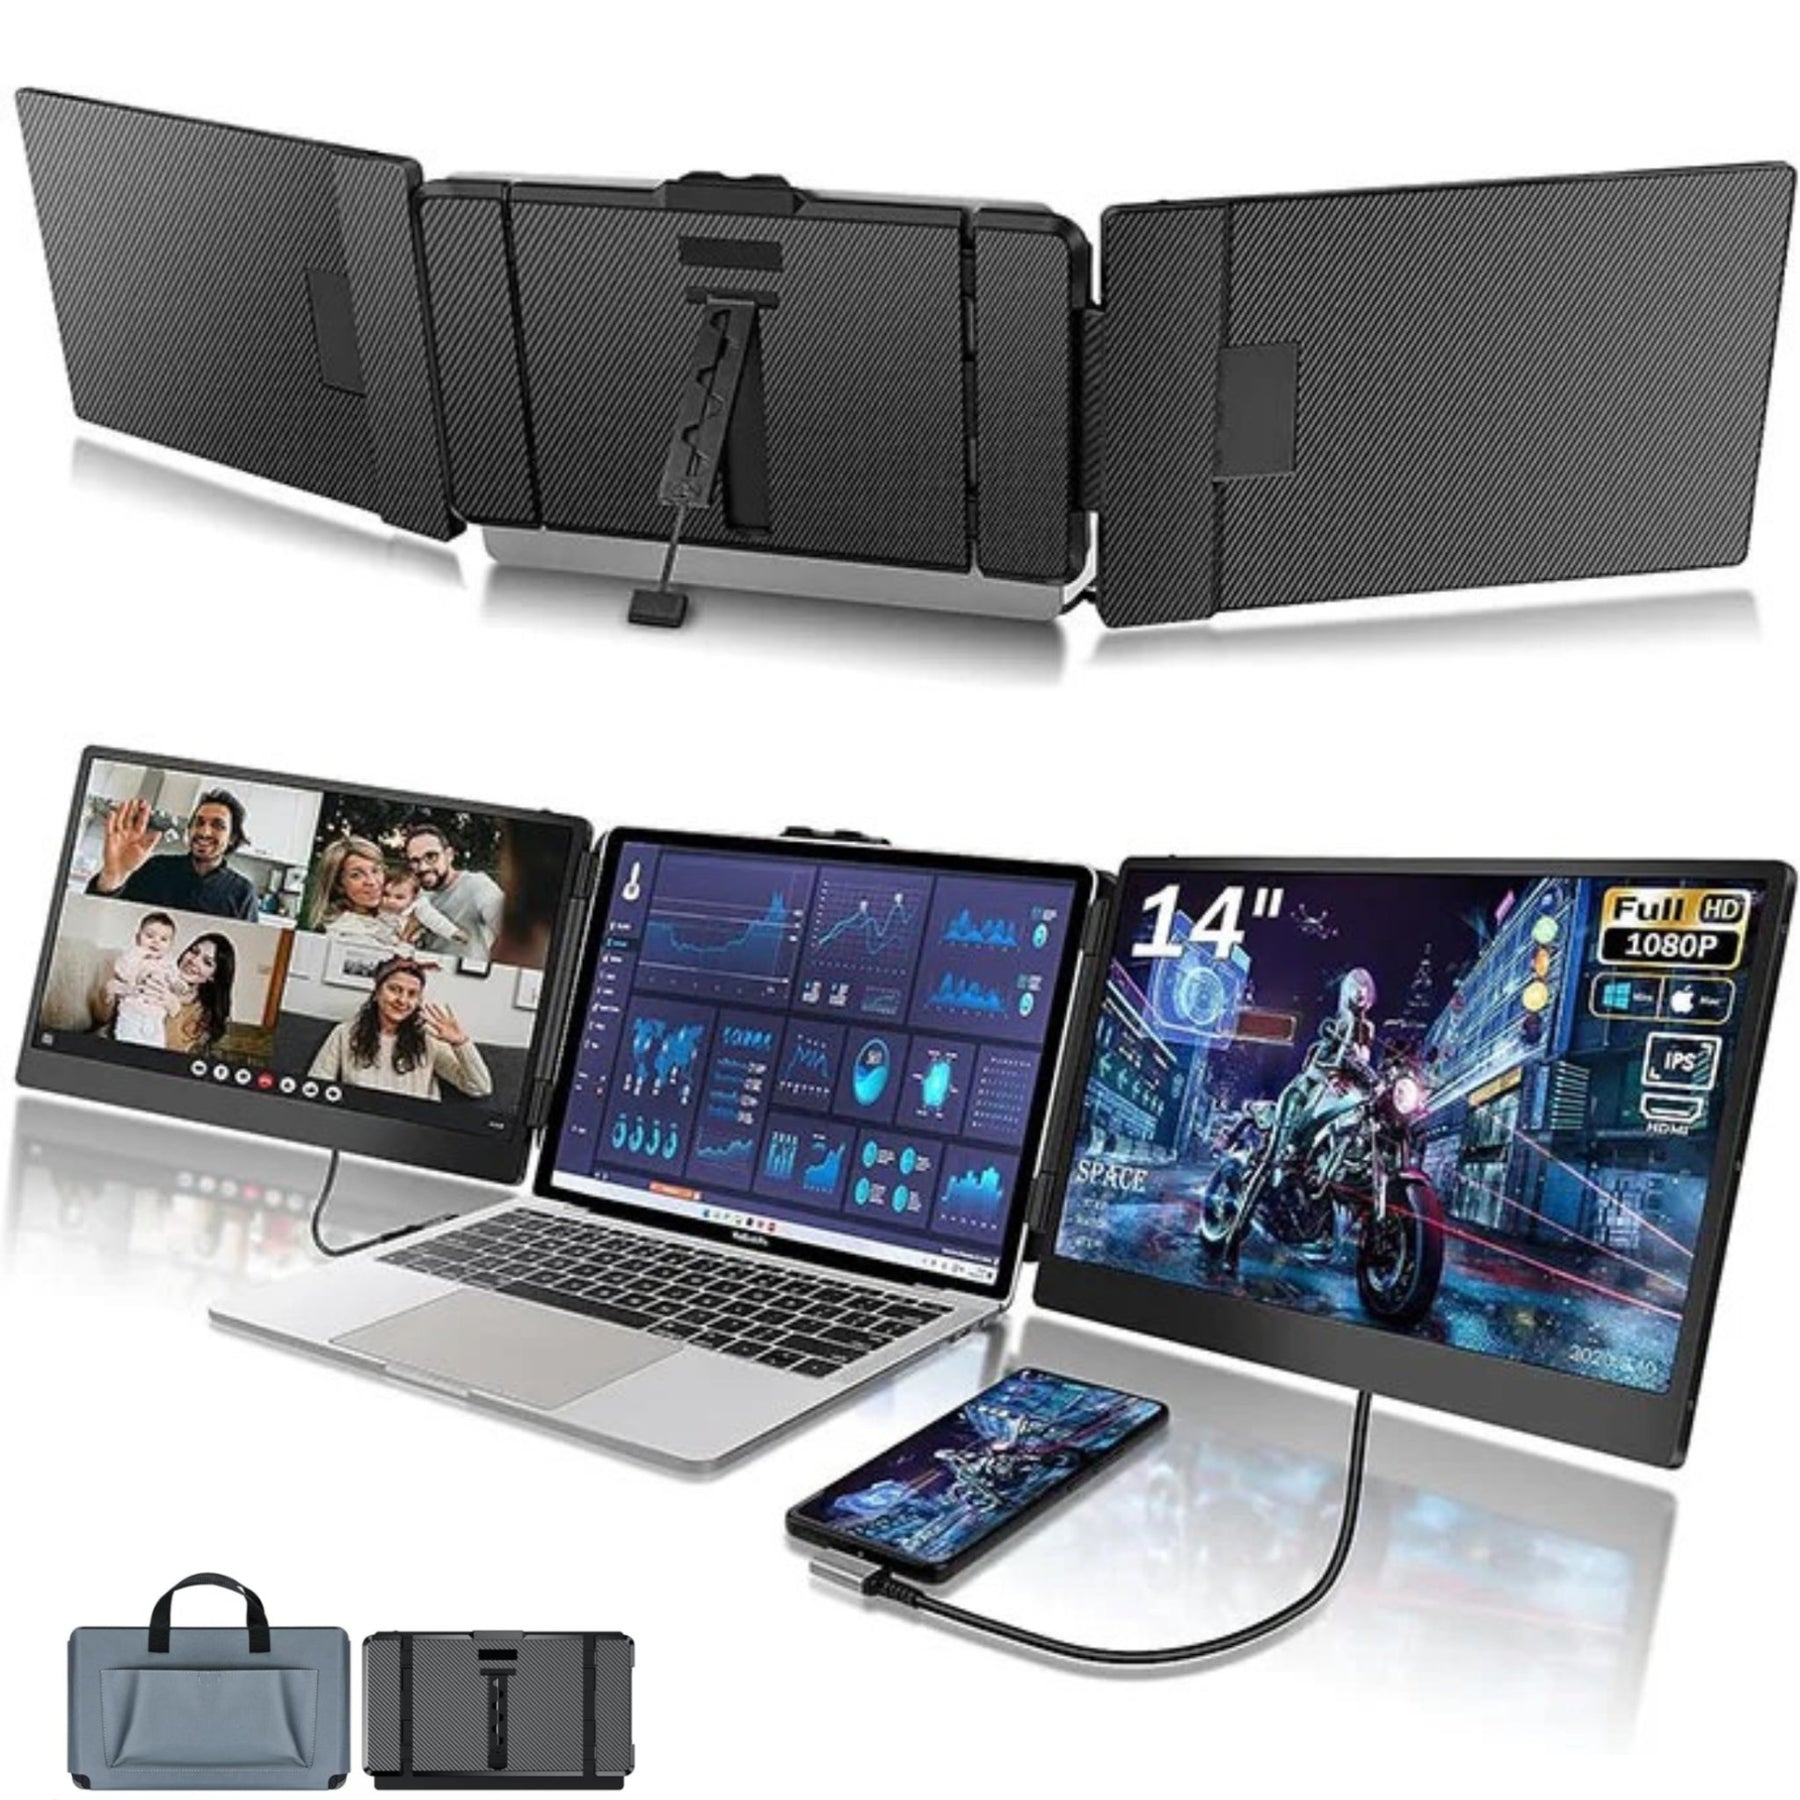 TUTT S2 Portable Laptop Monitor Screen Triple Extender 14” FHD 1080P IPS Built-in Stand and Speakers, HDMI/Type-C Plug and Play Display for 13"-17" Laptops Mac Window Android Linux - TUTT